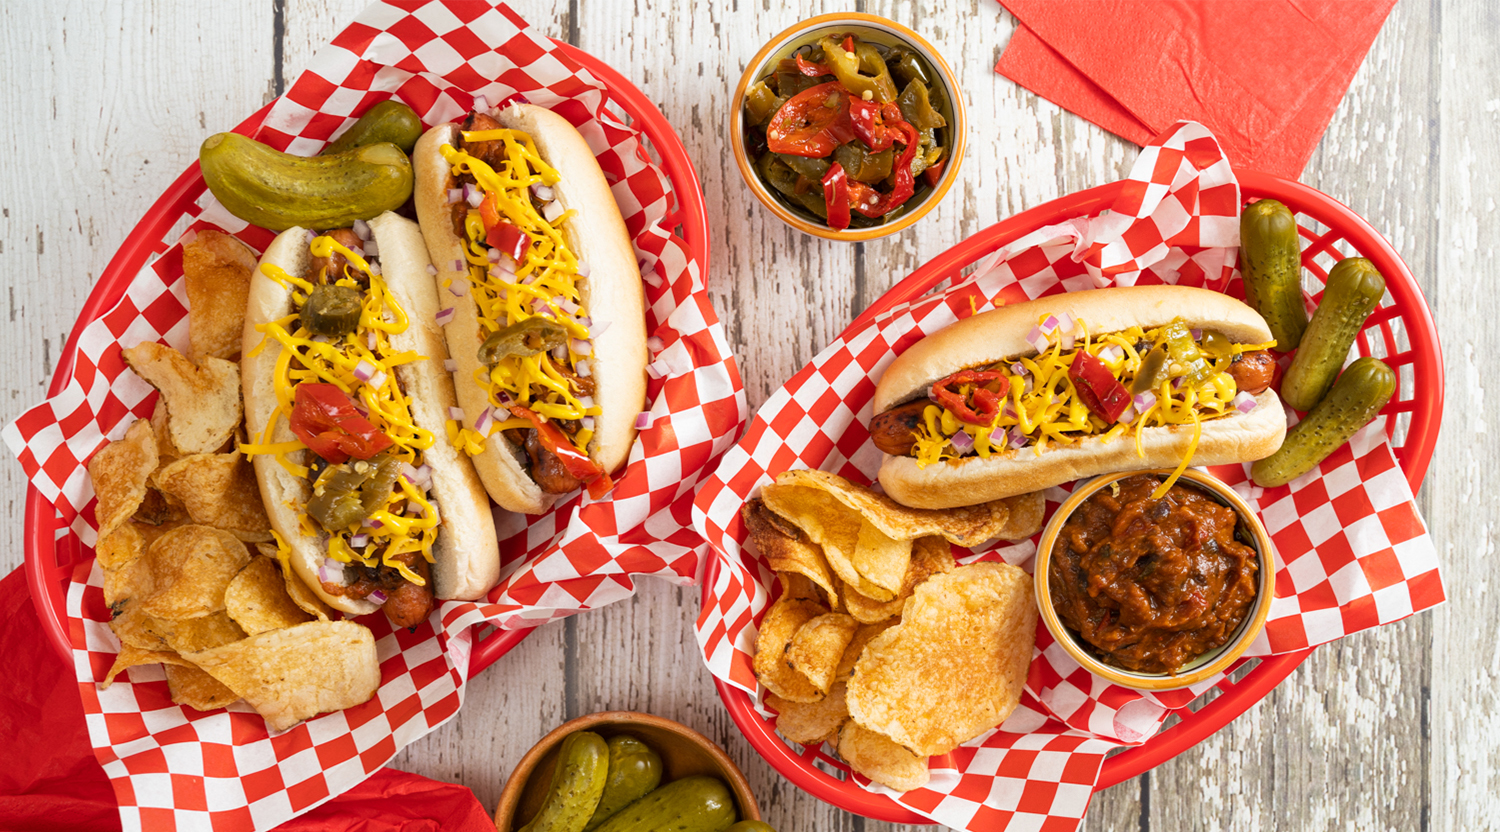 Grilled Chili Dogs